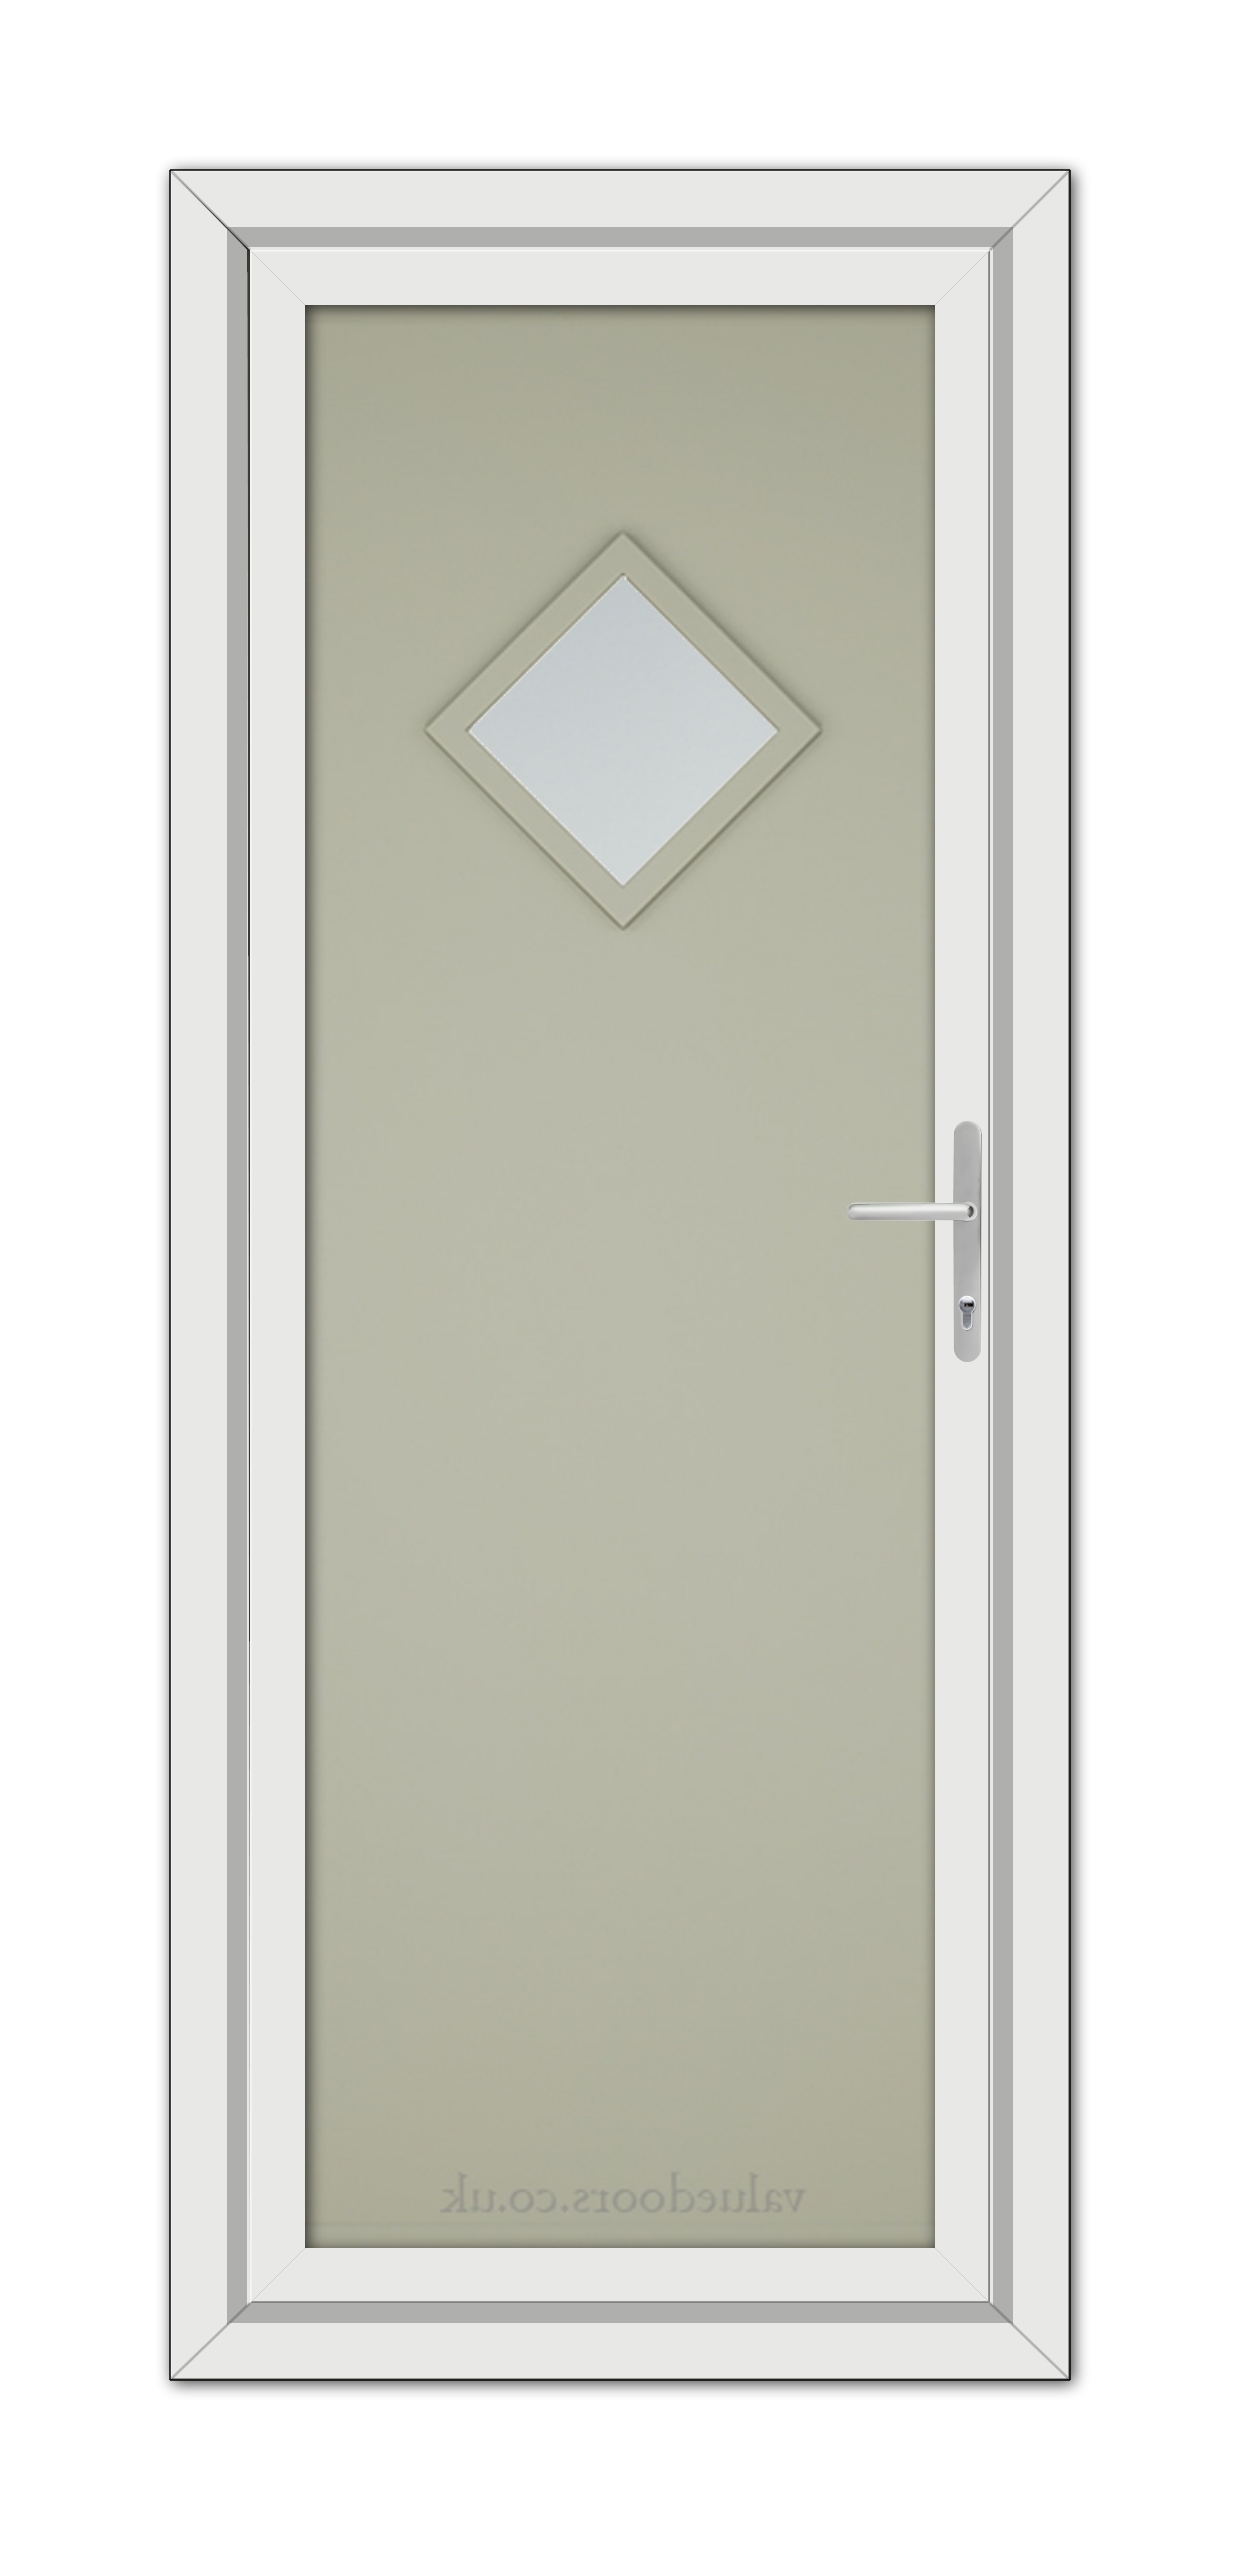 A Agate Grey Modern 5131 uPVC Door with a frosted glass panel featuring a small diamond-shaped clear glass window and a silver handle on the right side.